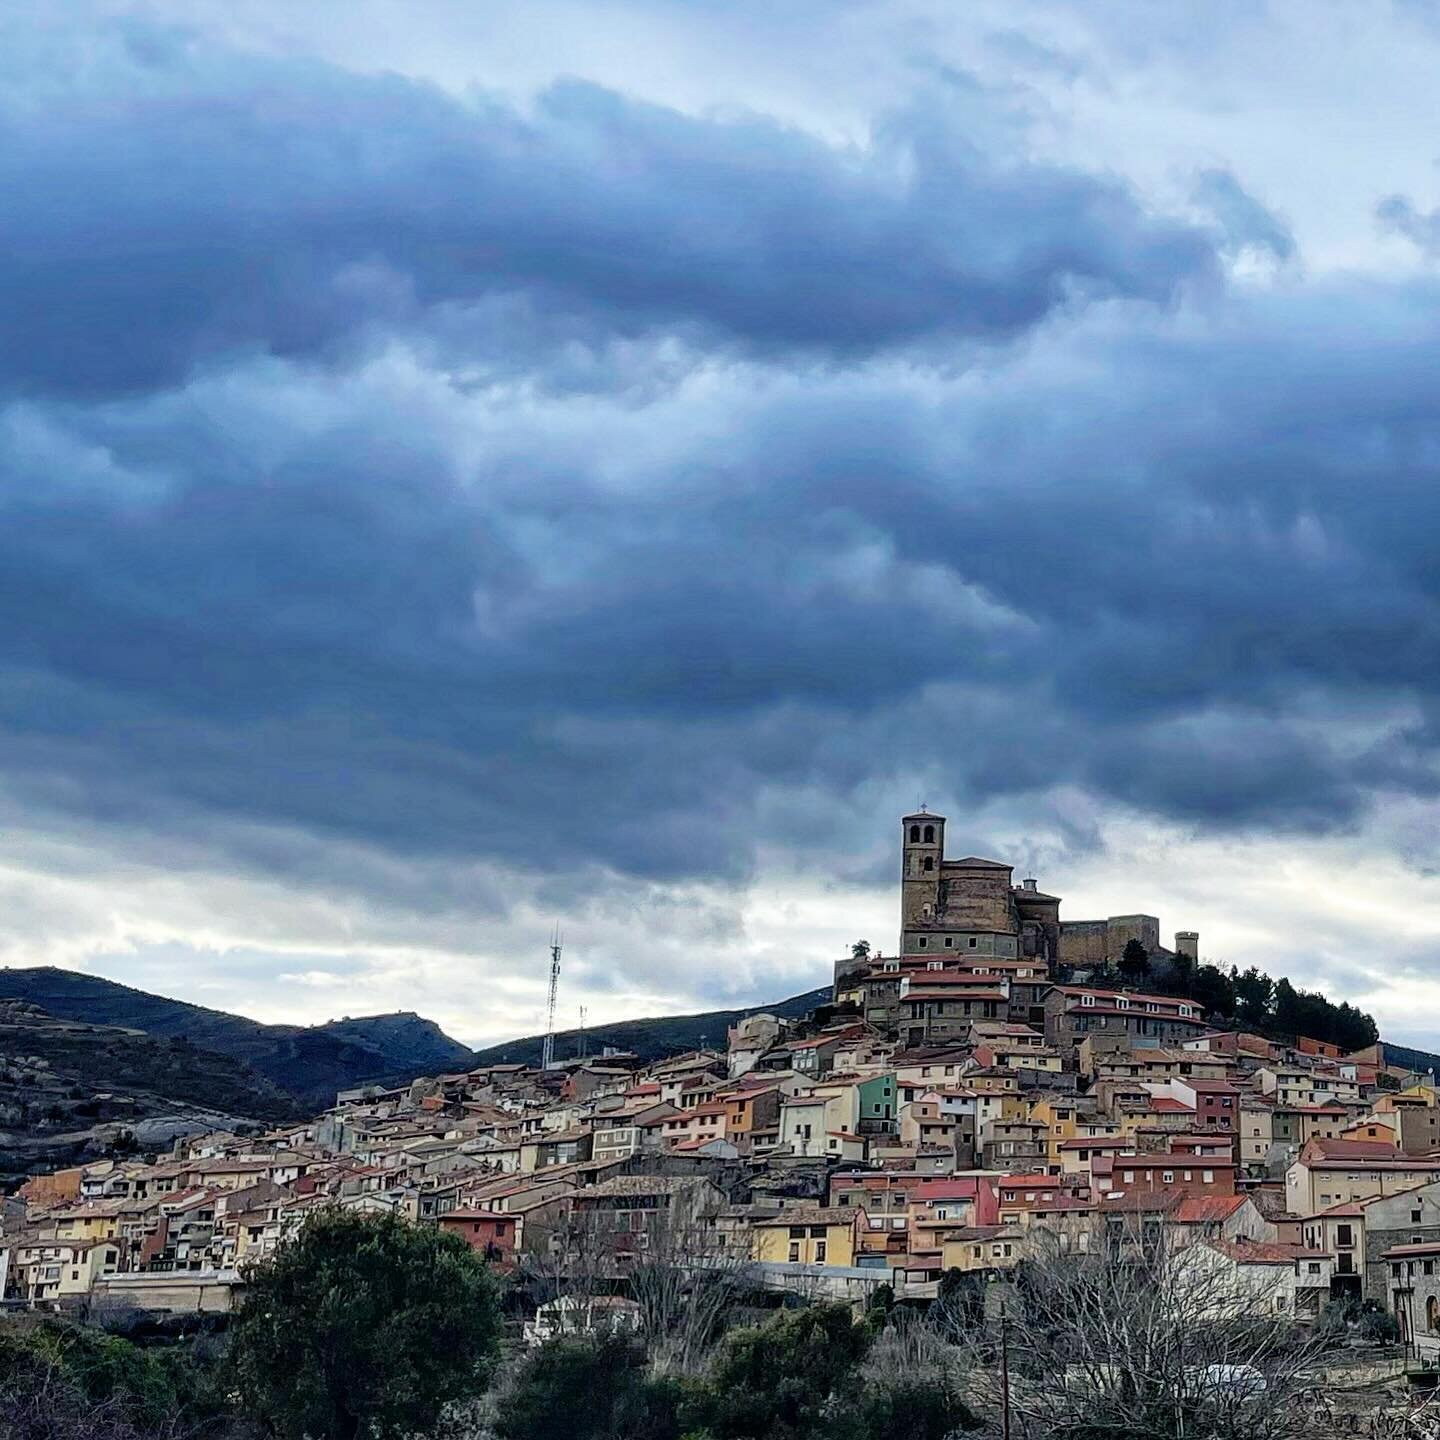 Hill Town.  Typical village of much of medieval rural Spain, built on a hill, with a castle and surrounded by small plot farms.  #rural #ruralSpain #Spain #SpainTour #ForgottenSpain